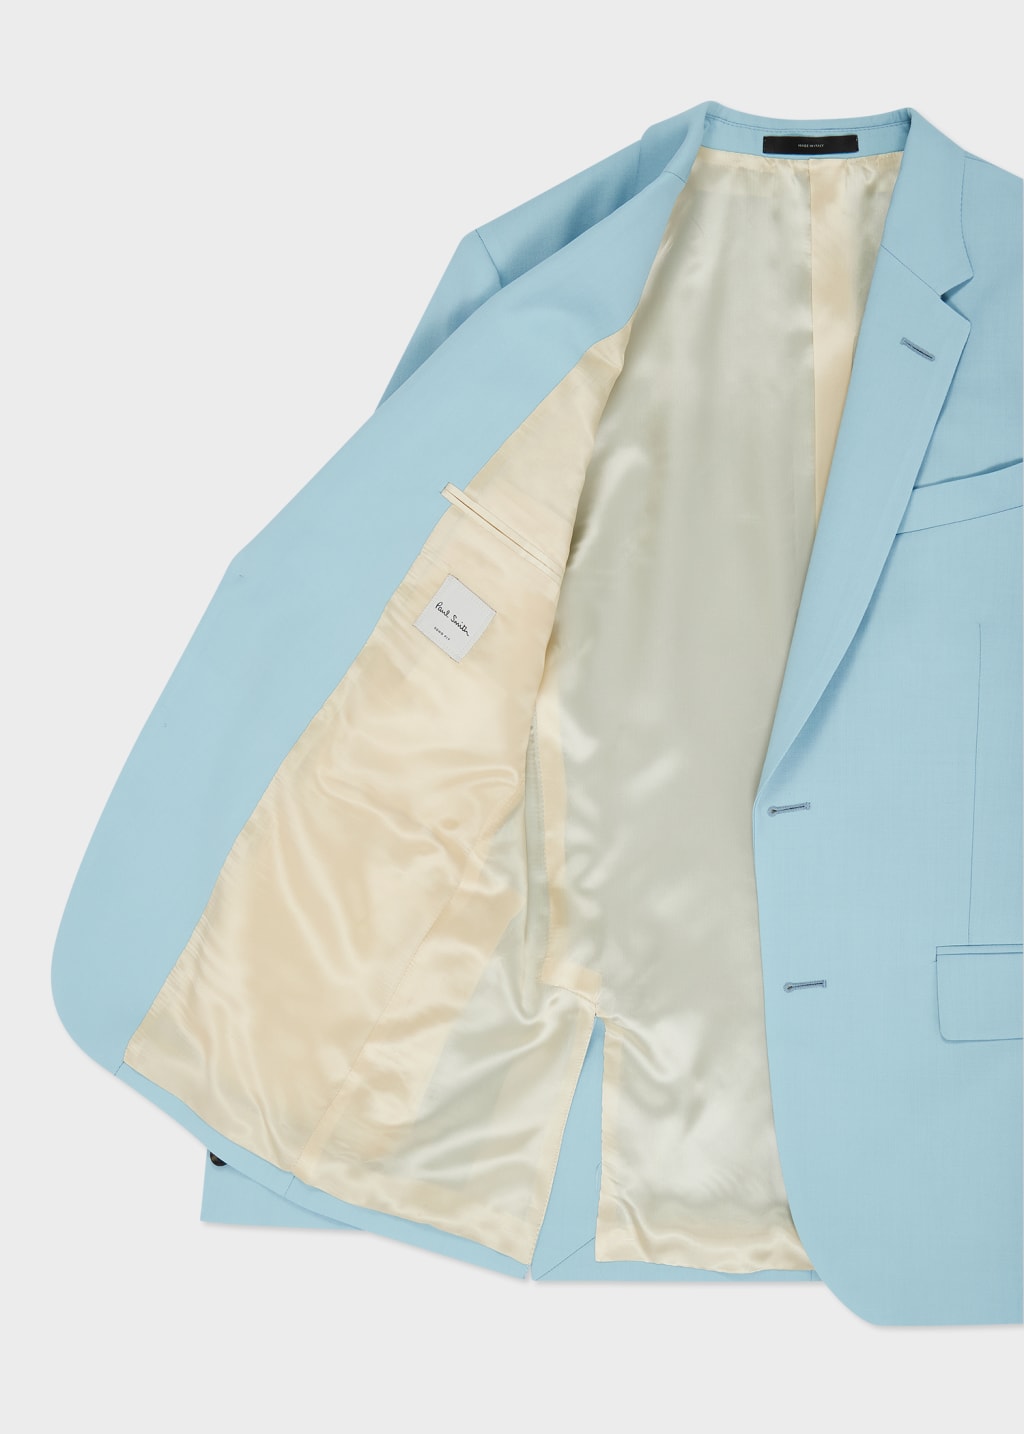 Product view - The Soho - Tailored-Fit Pale Blue Wool-Mohair Suit Paul Smith